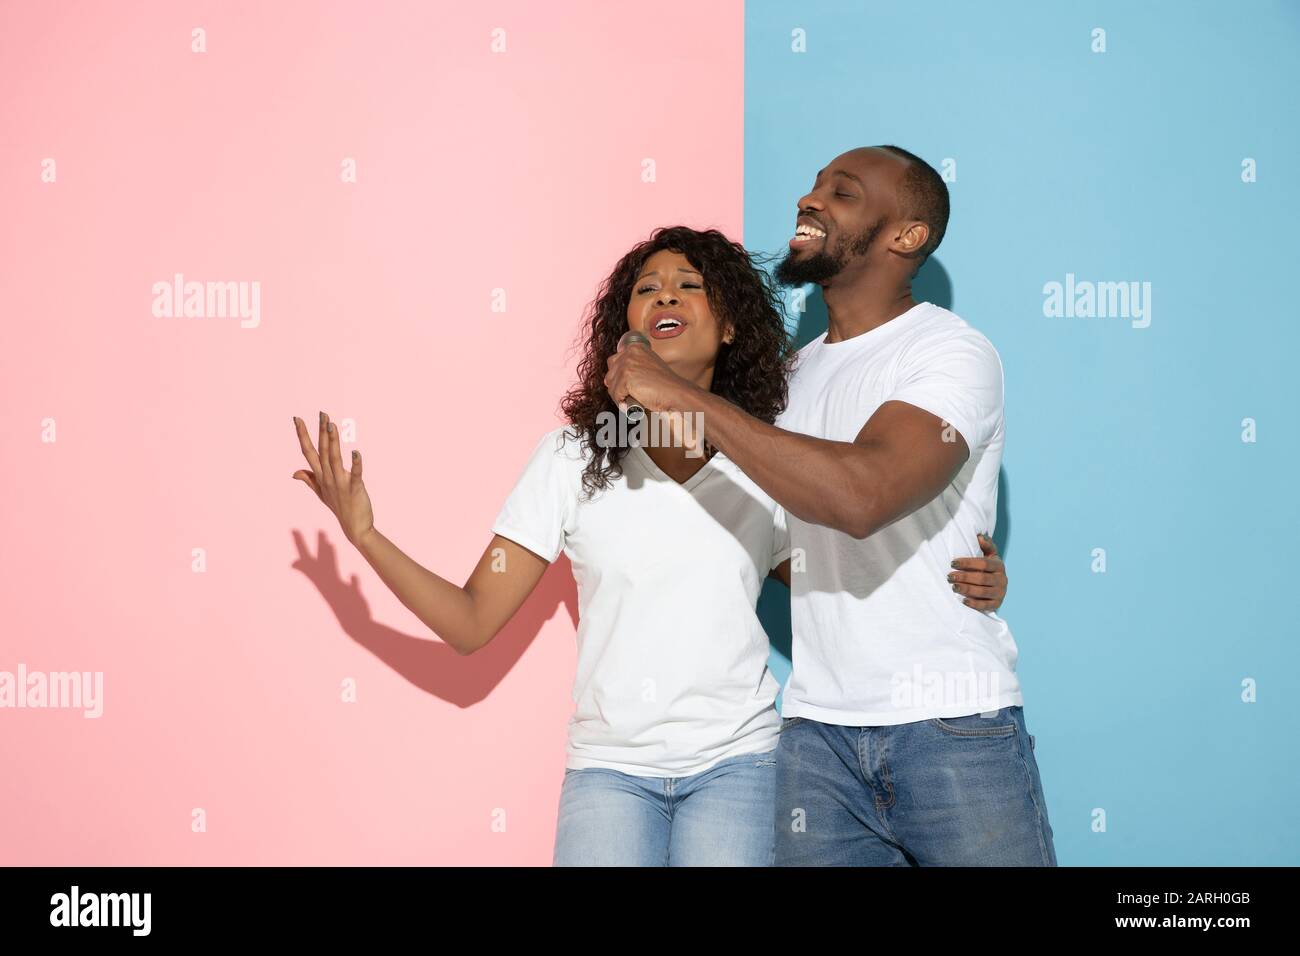 Singing song together. Young man and woman in casual clothes on pink, blue bicolored background. Concept of human emotions, facial expession, relations, ad. Beautiful african-american couple. Stock Photo